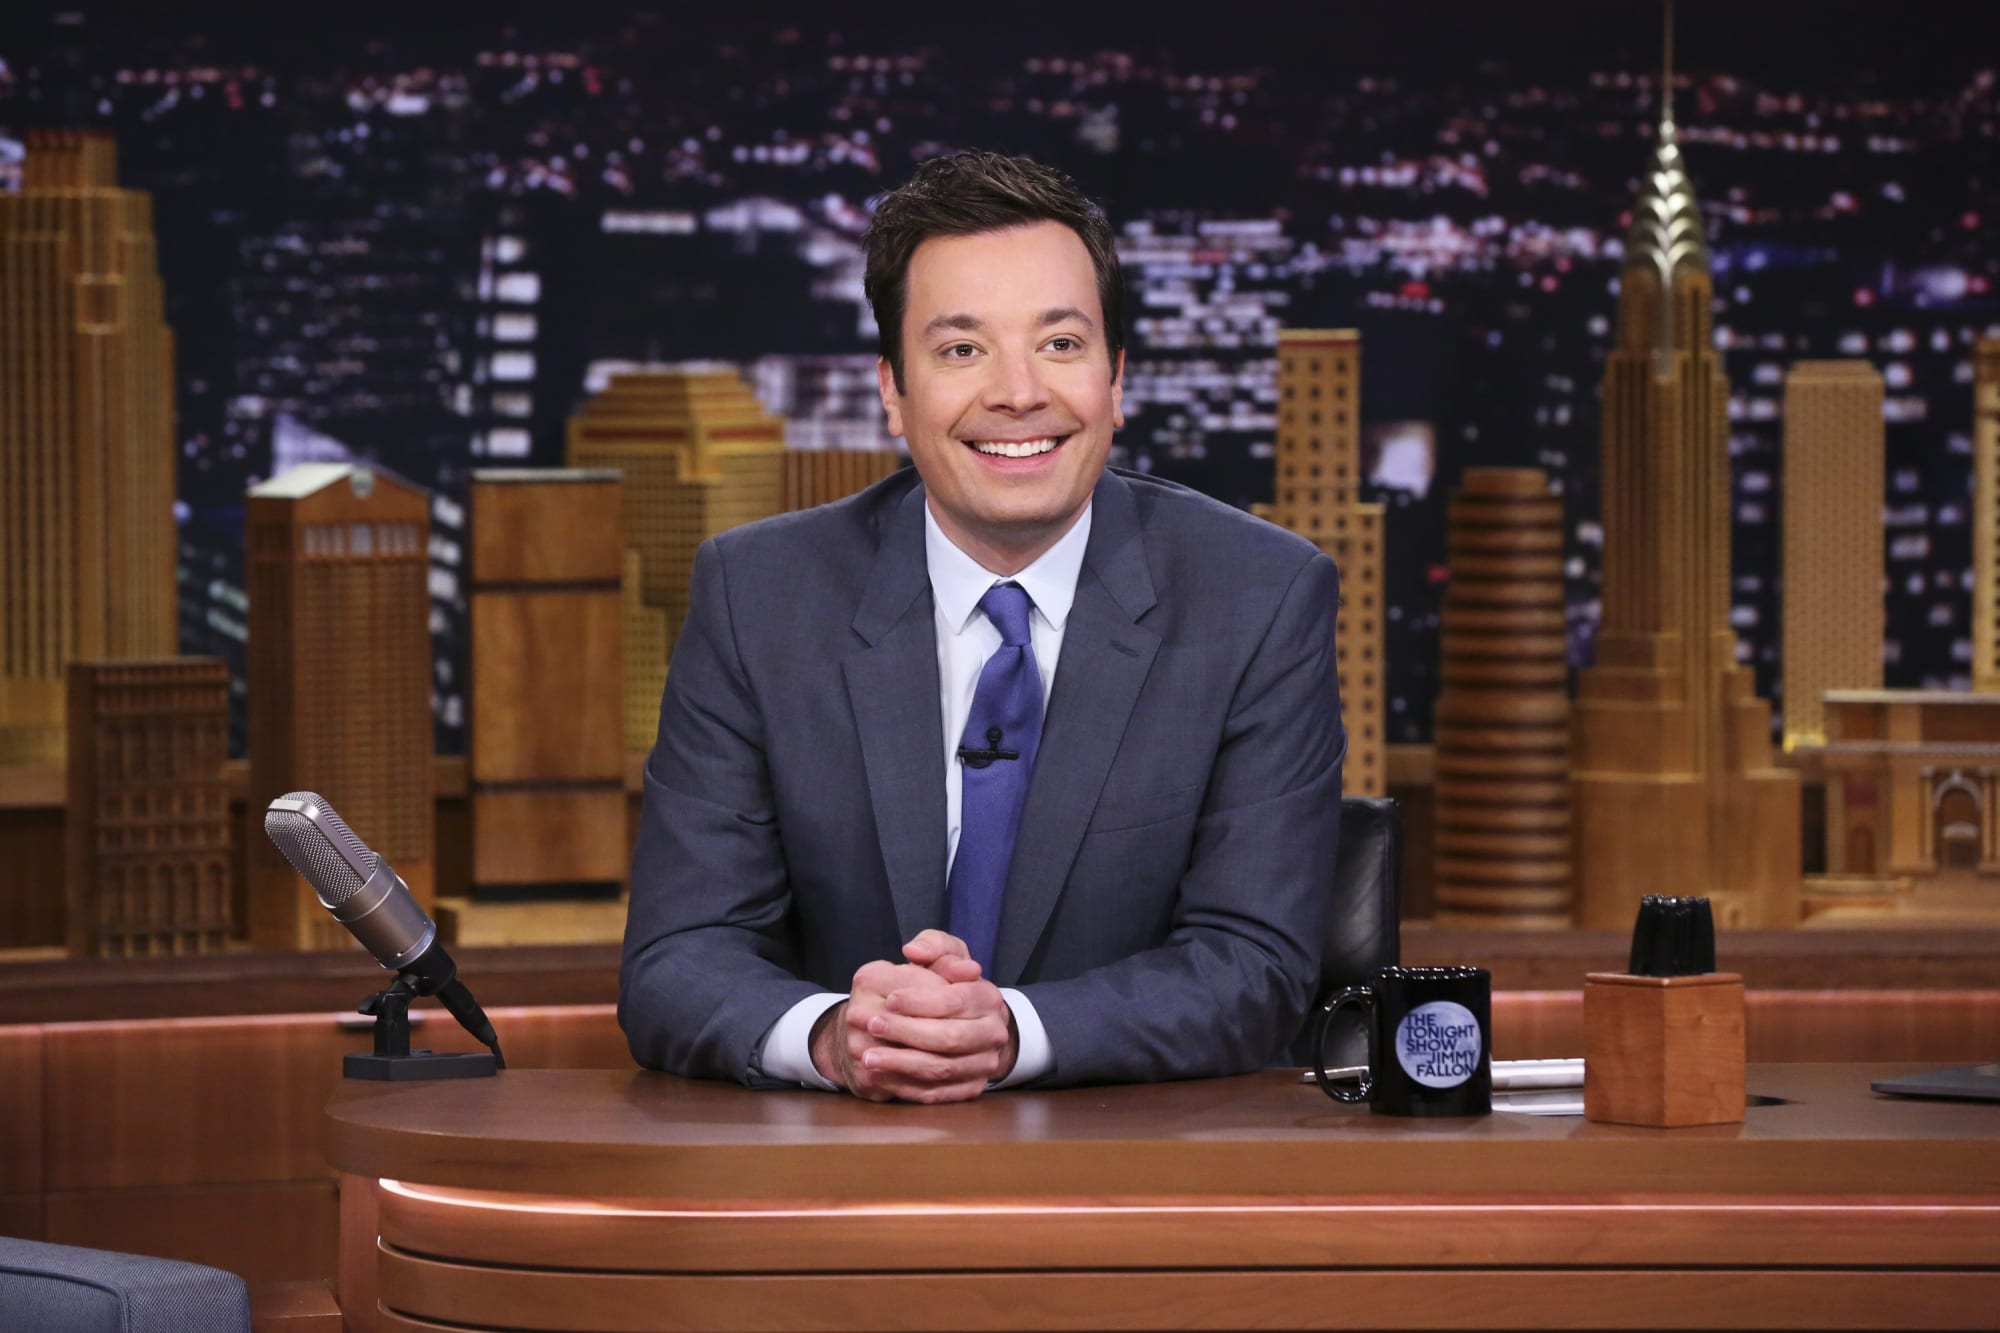 The Tonight Show guest lineup for April 24 April 28